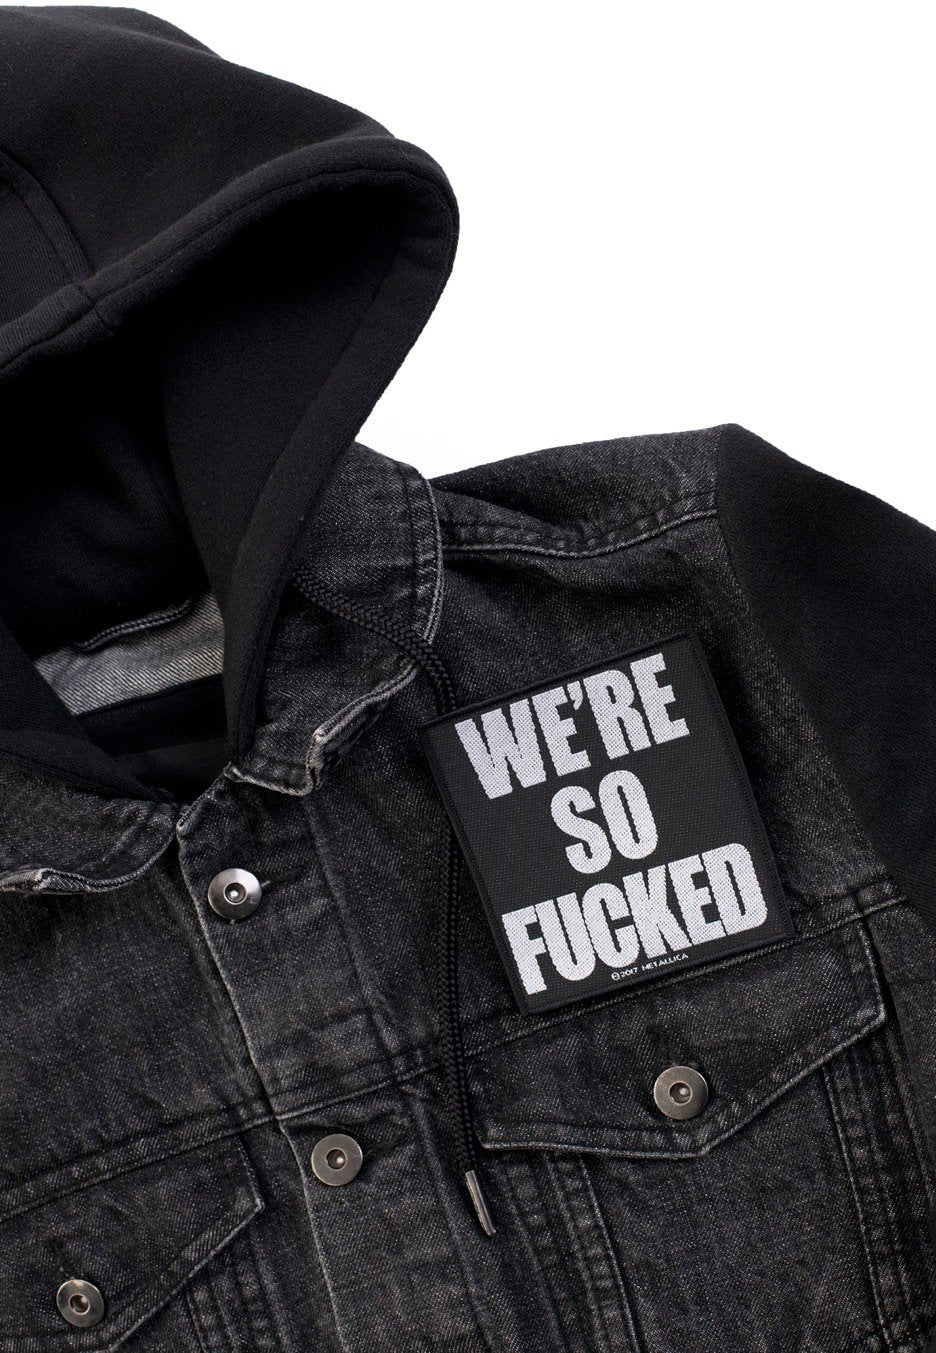 Metallica - We're So Fucked - Patch